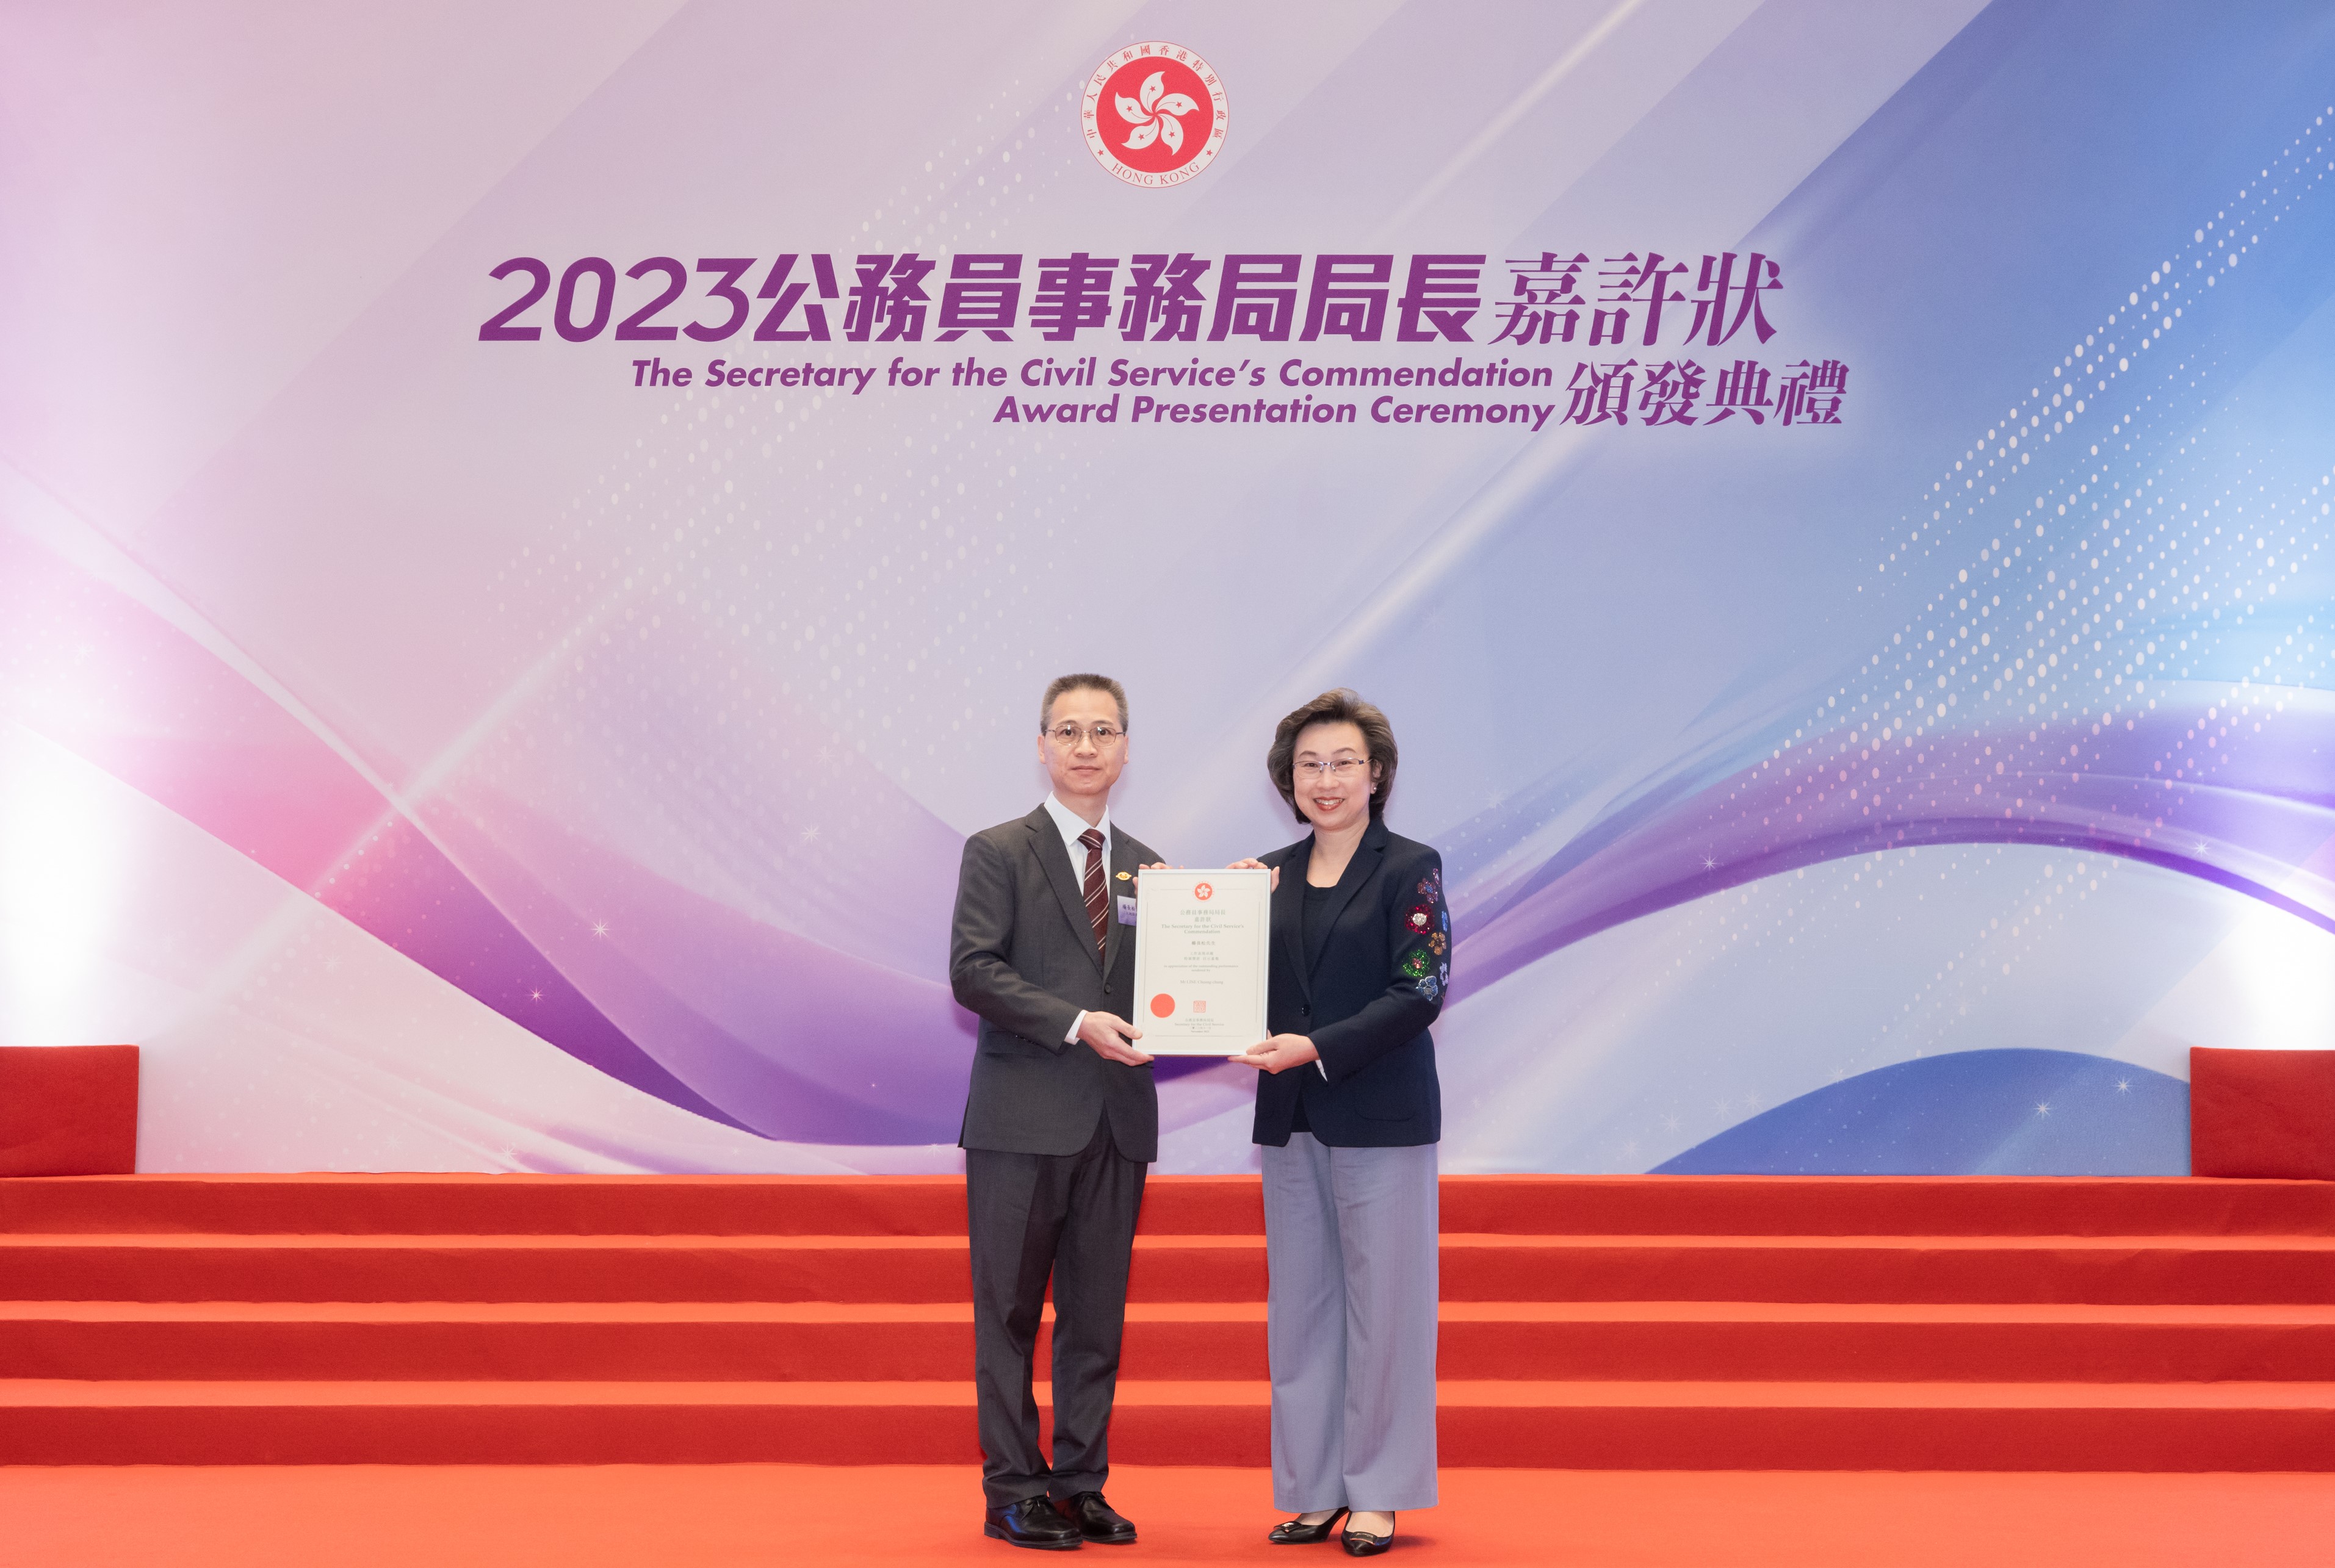 The Secretary for the Civil Service, Mrs YEUNG HO Poi-yan, Ingrid, JP (right) presented The Secretary for the Civil Service's Commendation Award to Clerical Officer of the Land Registry, Mr LINE Cheung-chung